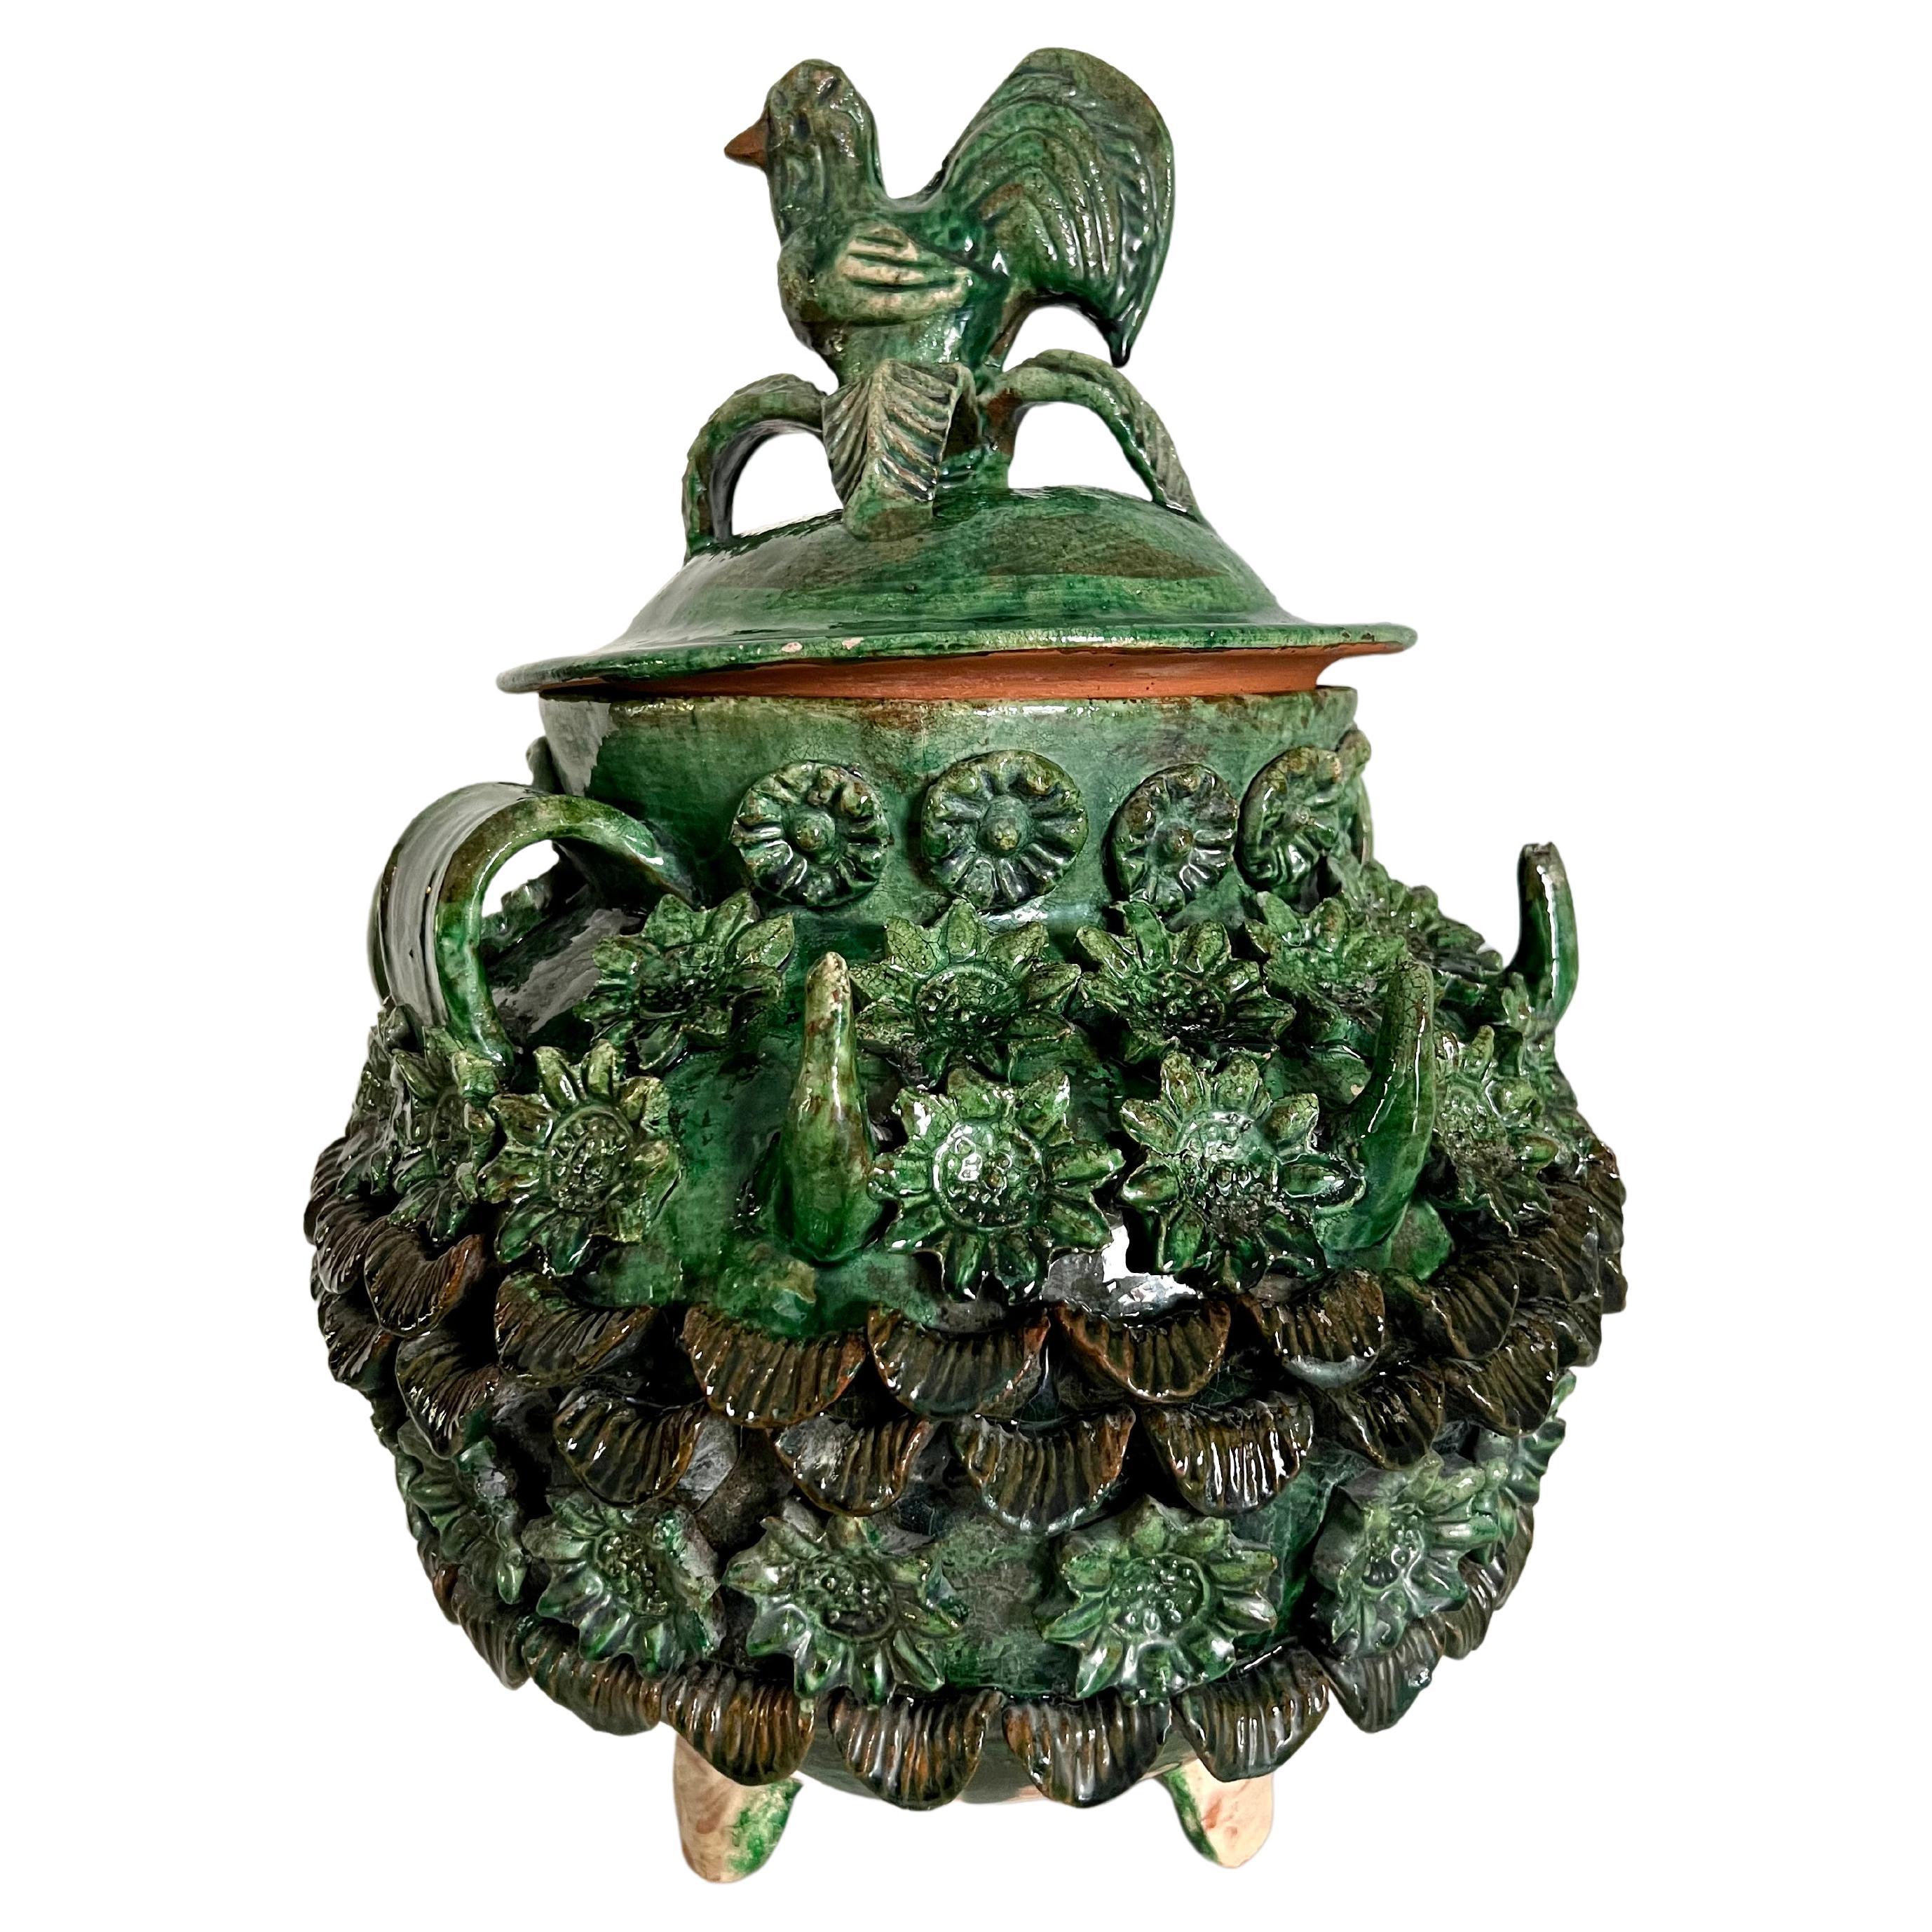 Glazed Majolica Lidded Jar Container with Flowers and Rooster on Legs